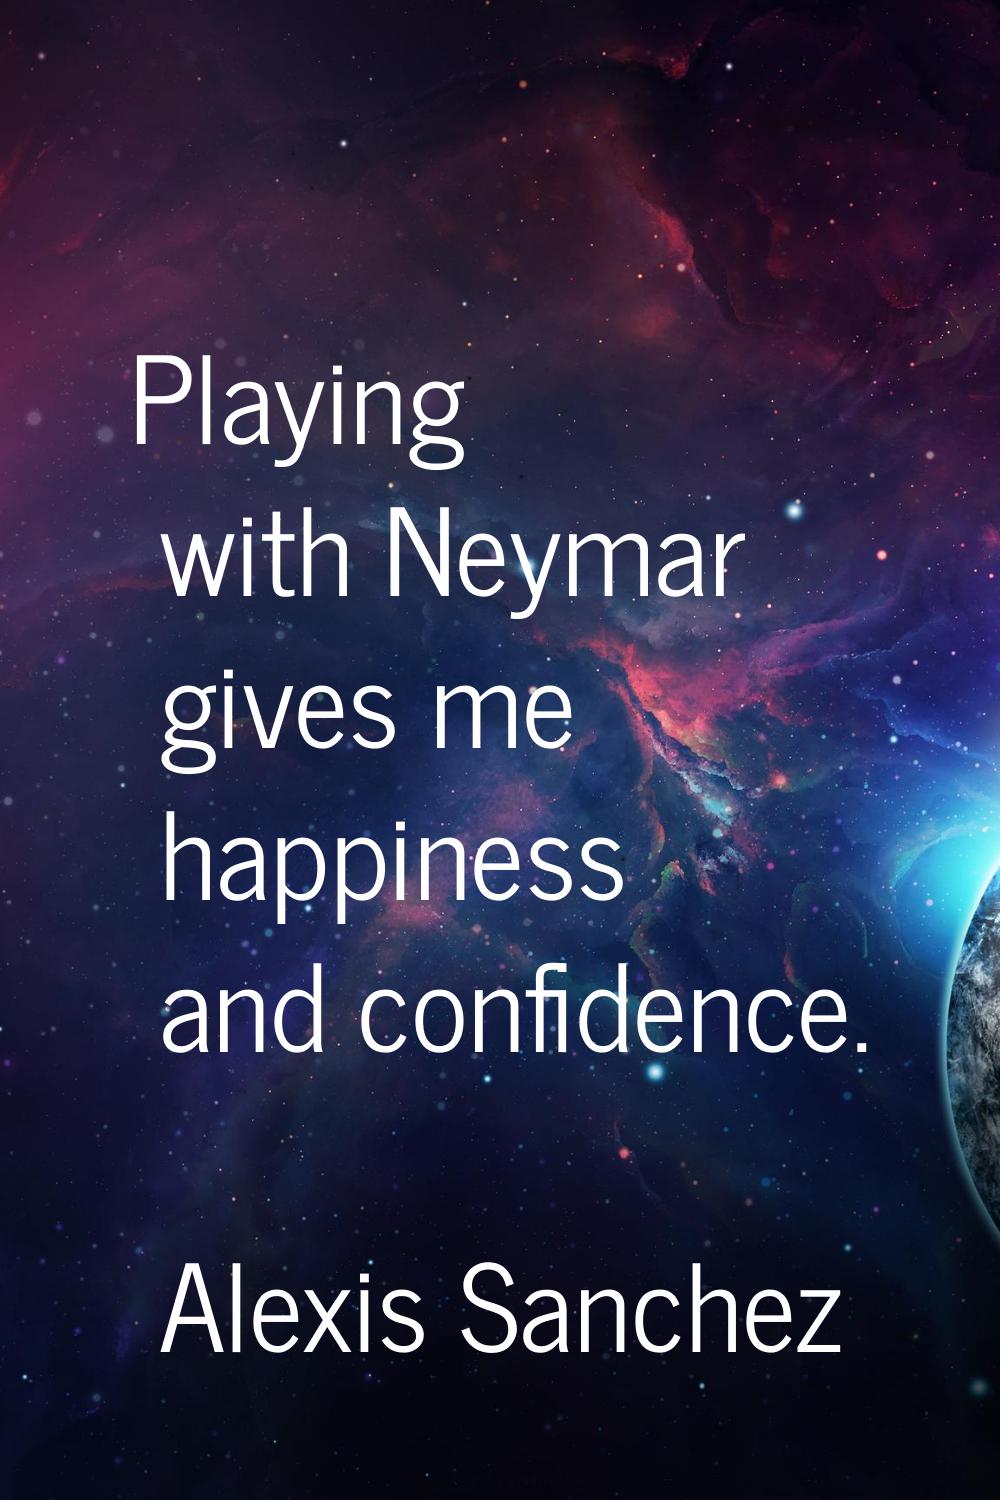 Playing with Neymar gives me happiness and confidence.